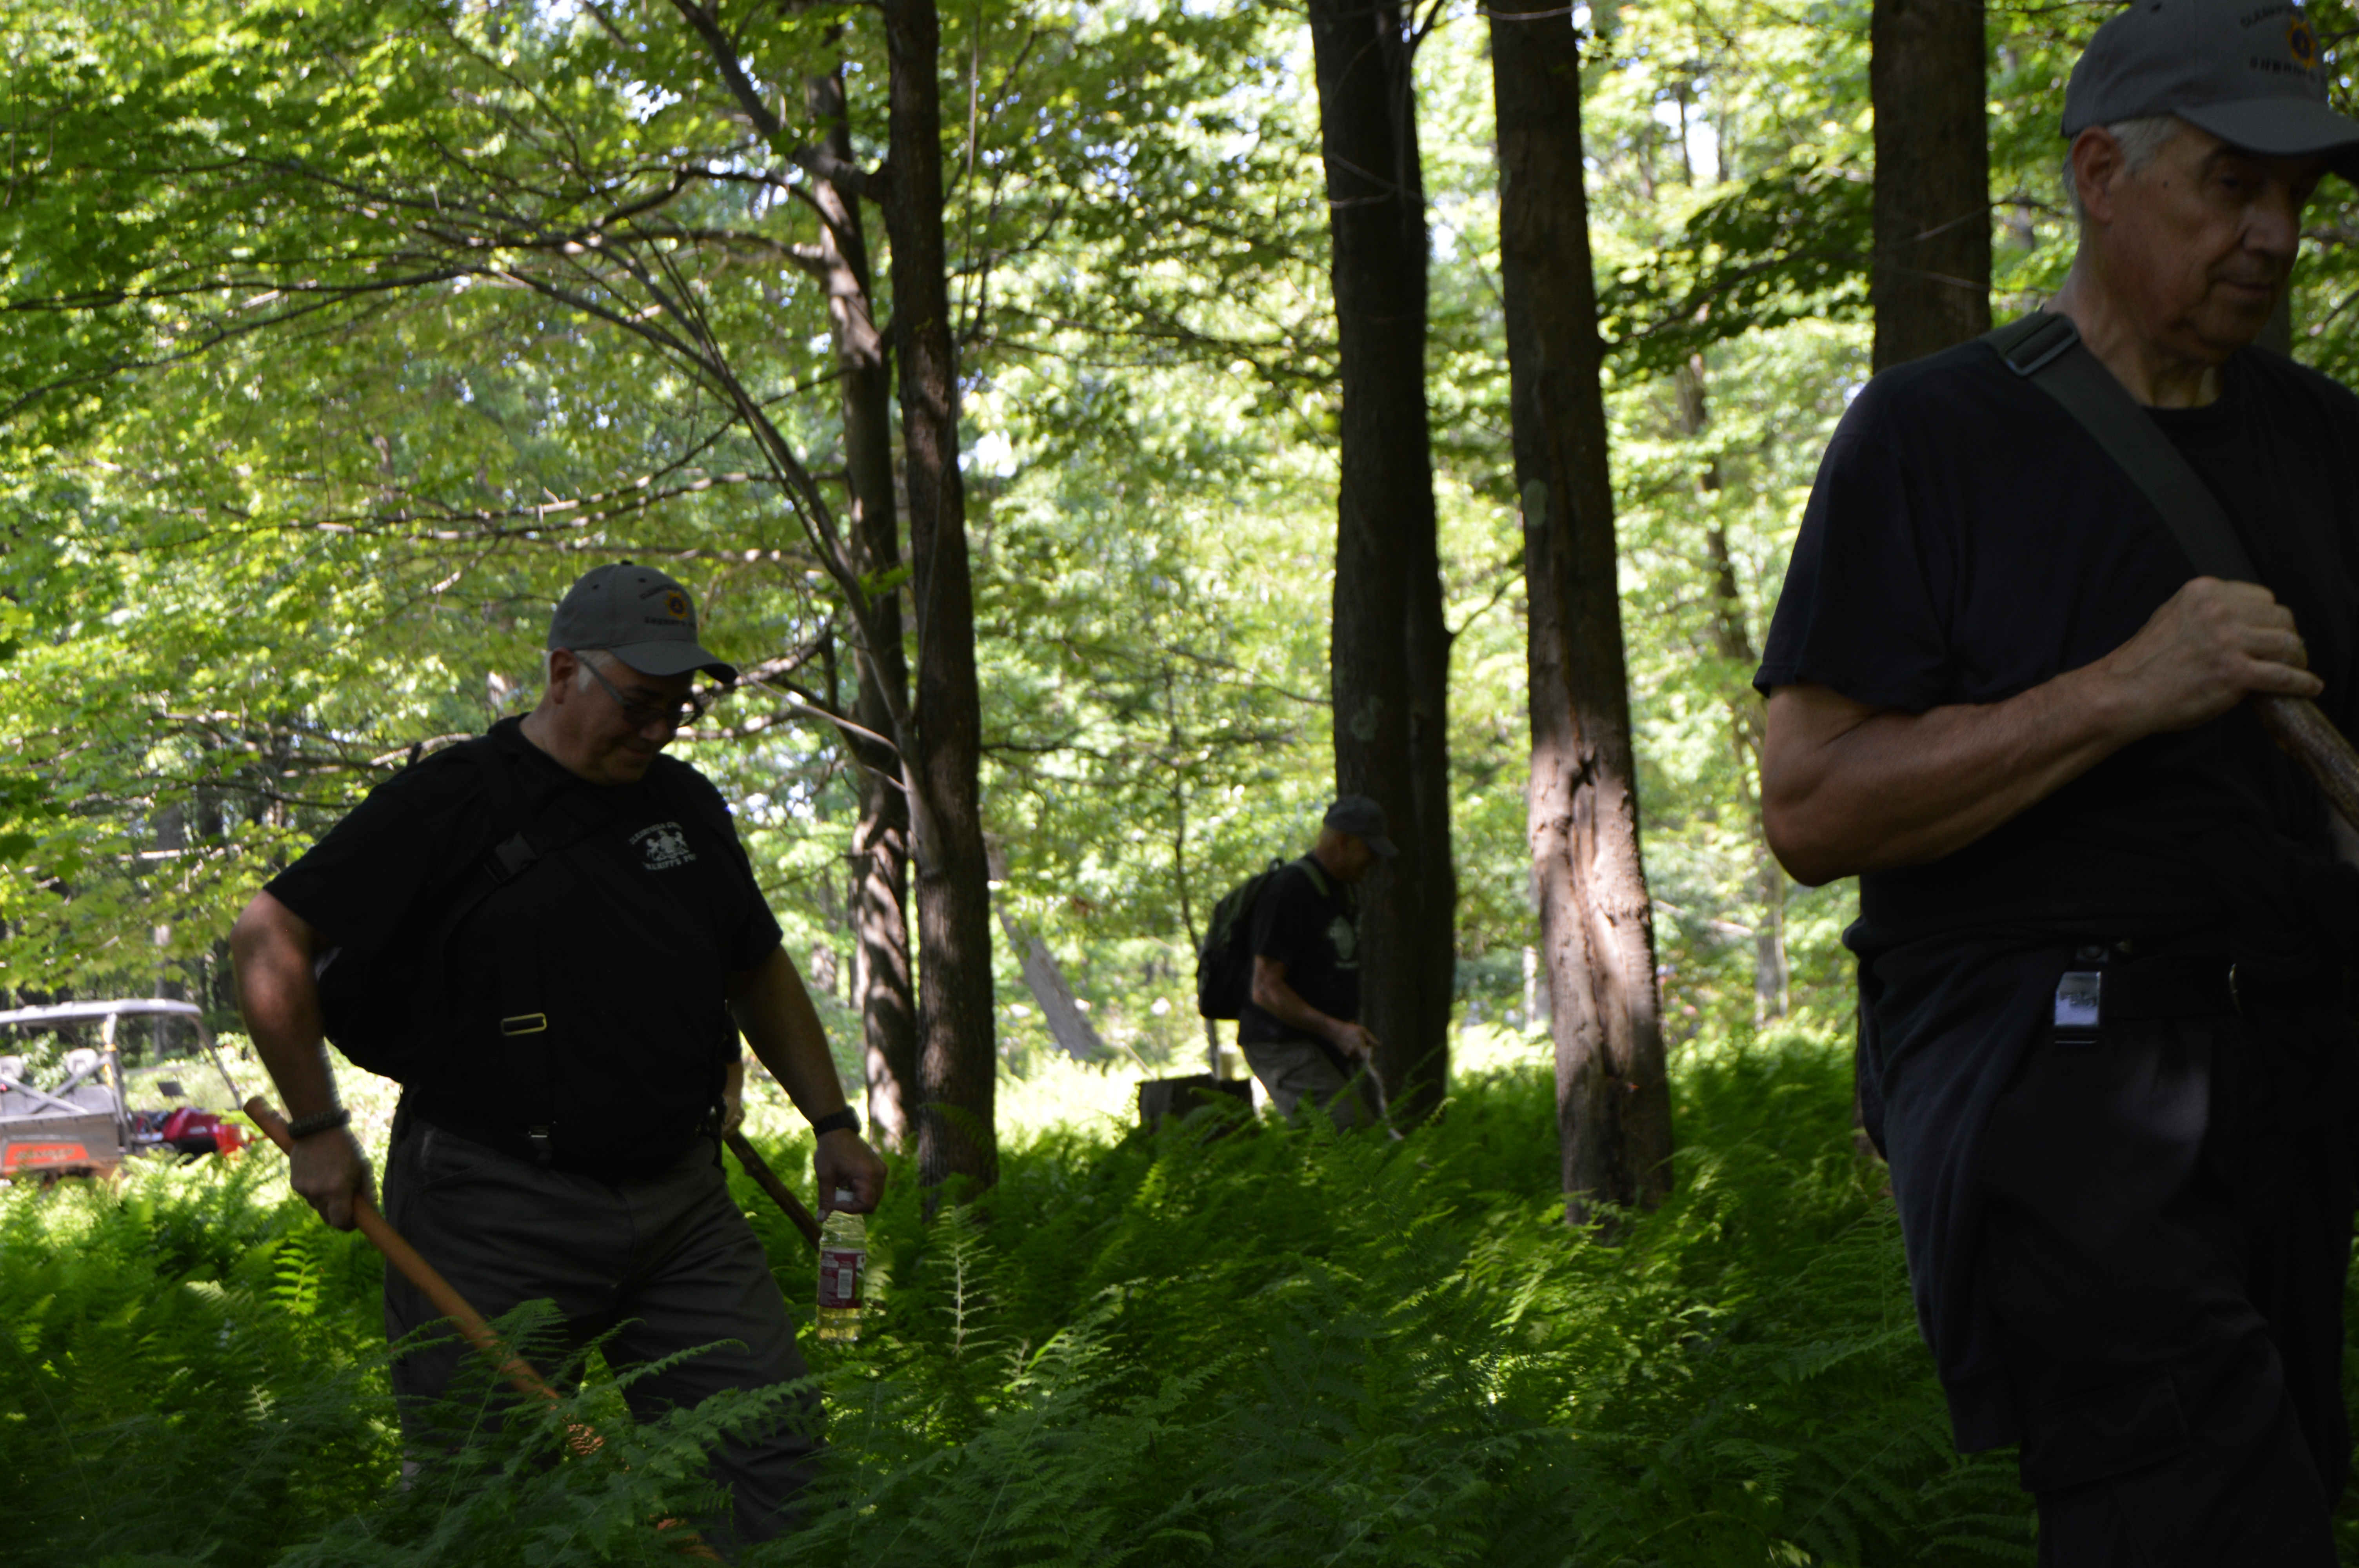 Members of the Clearfield County Sheriff's Posse move methodically through the forest near the Greenwood Club near Curwensville during a mock training exercise. The posse was on the look-out for a 7-year-old girl and any signs she may have passed through the area. The posse also had to be mindful of rattlesnakes and other potential hazards they may encounter while out on a real assignment. (Photo by Kimberly Finnigan)